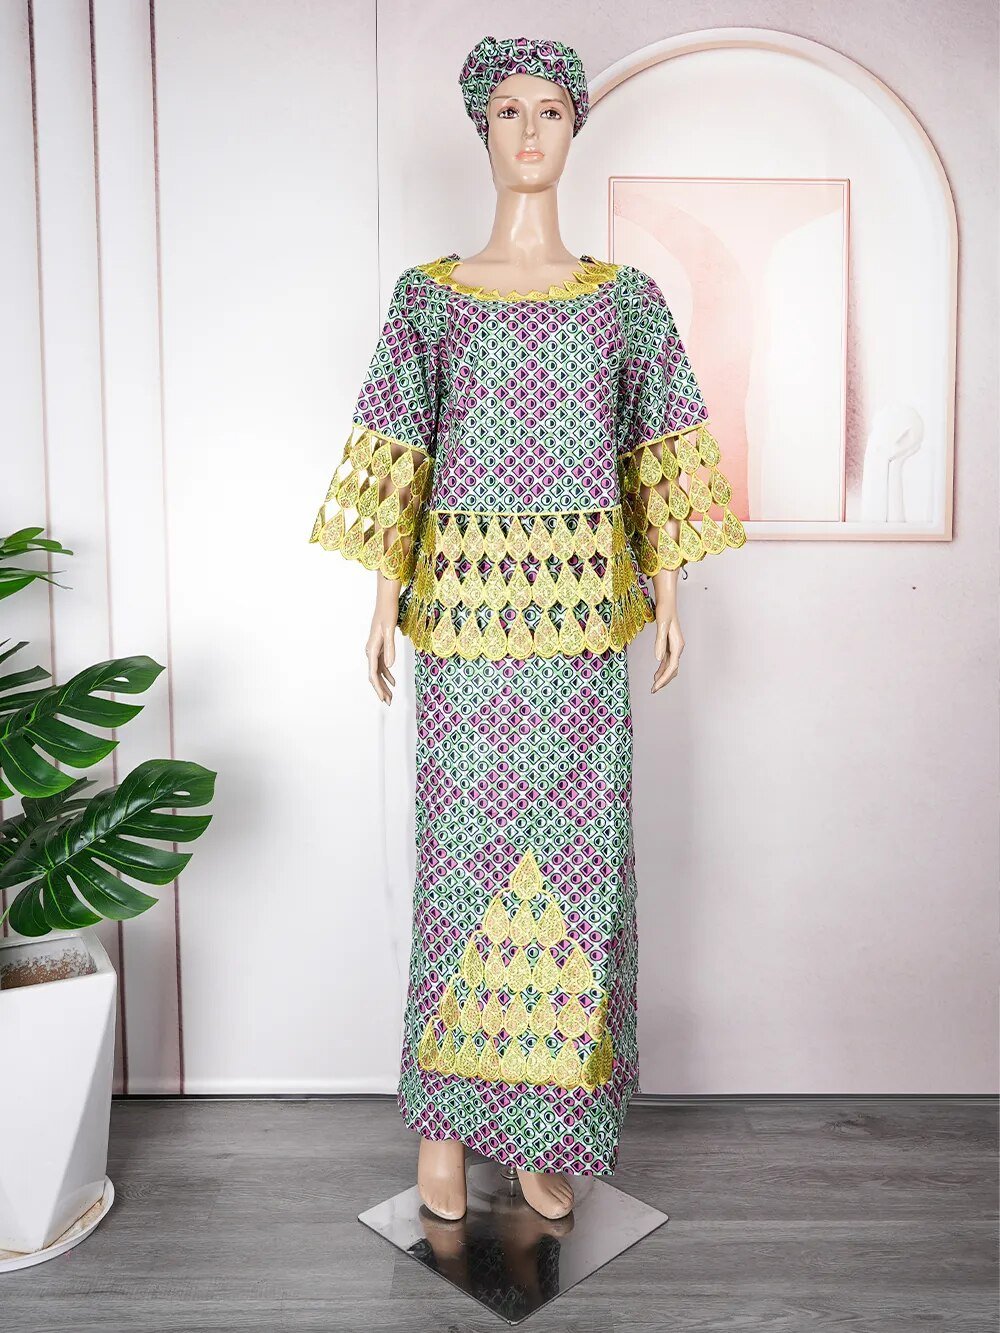 Traditional African Bazin Riche Dashiki Dress with Exquisite Embroidery Pattern for Women - Flexi Africa www.flexiafrica.com